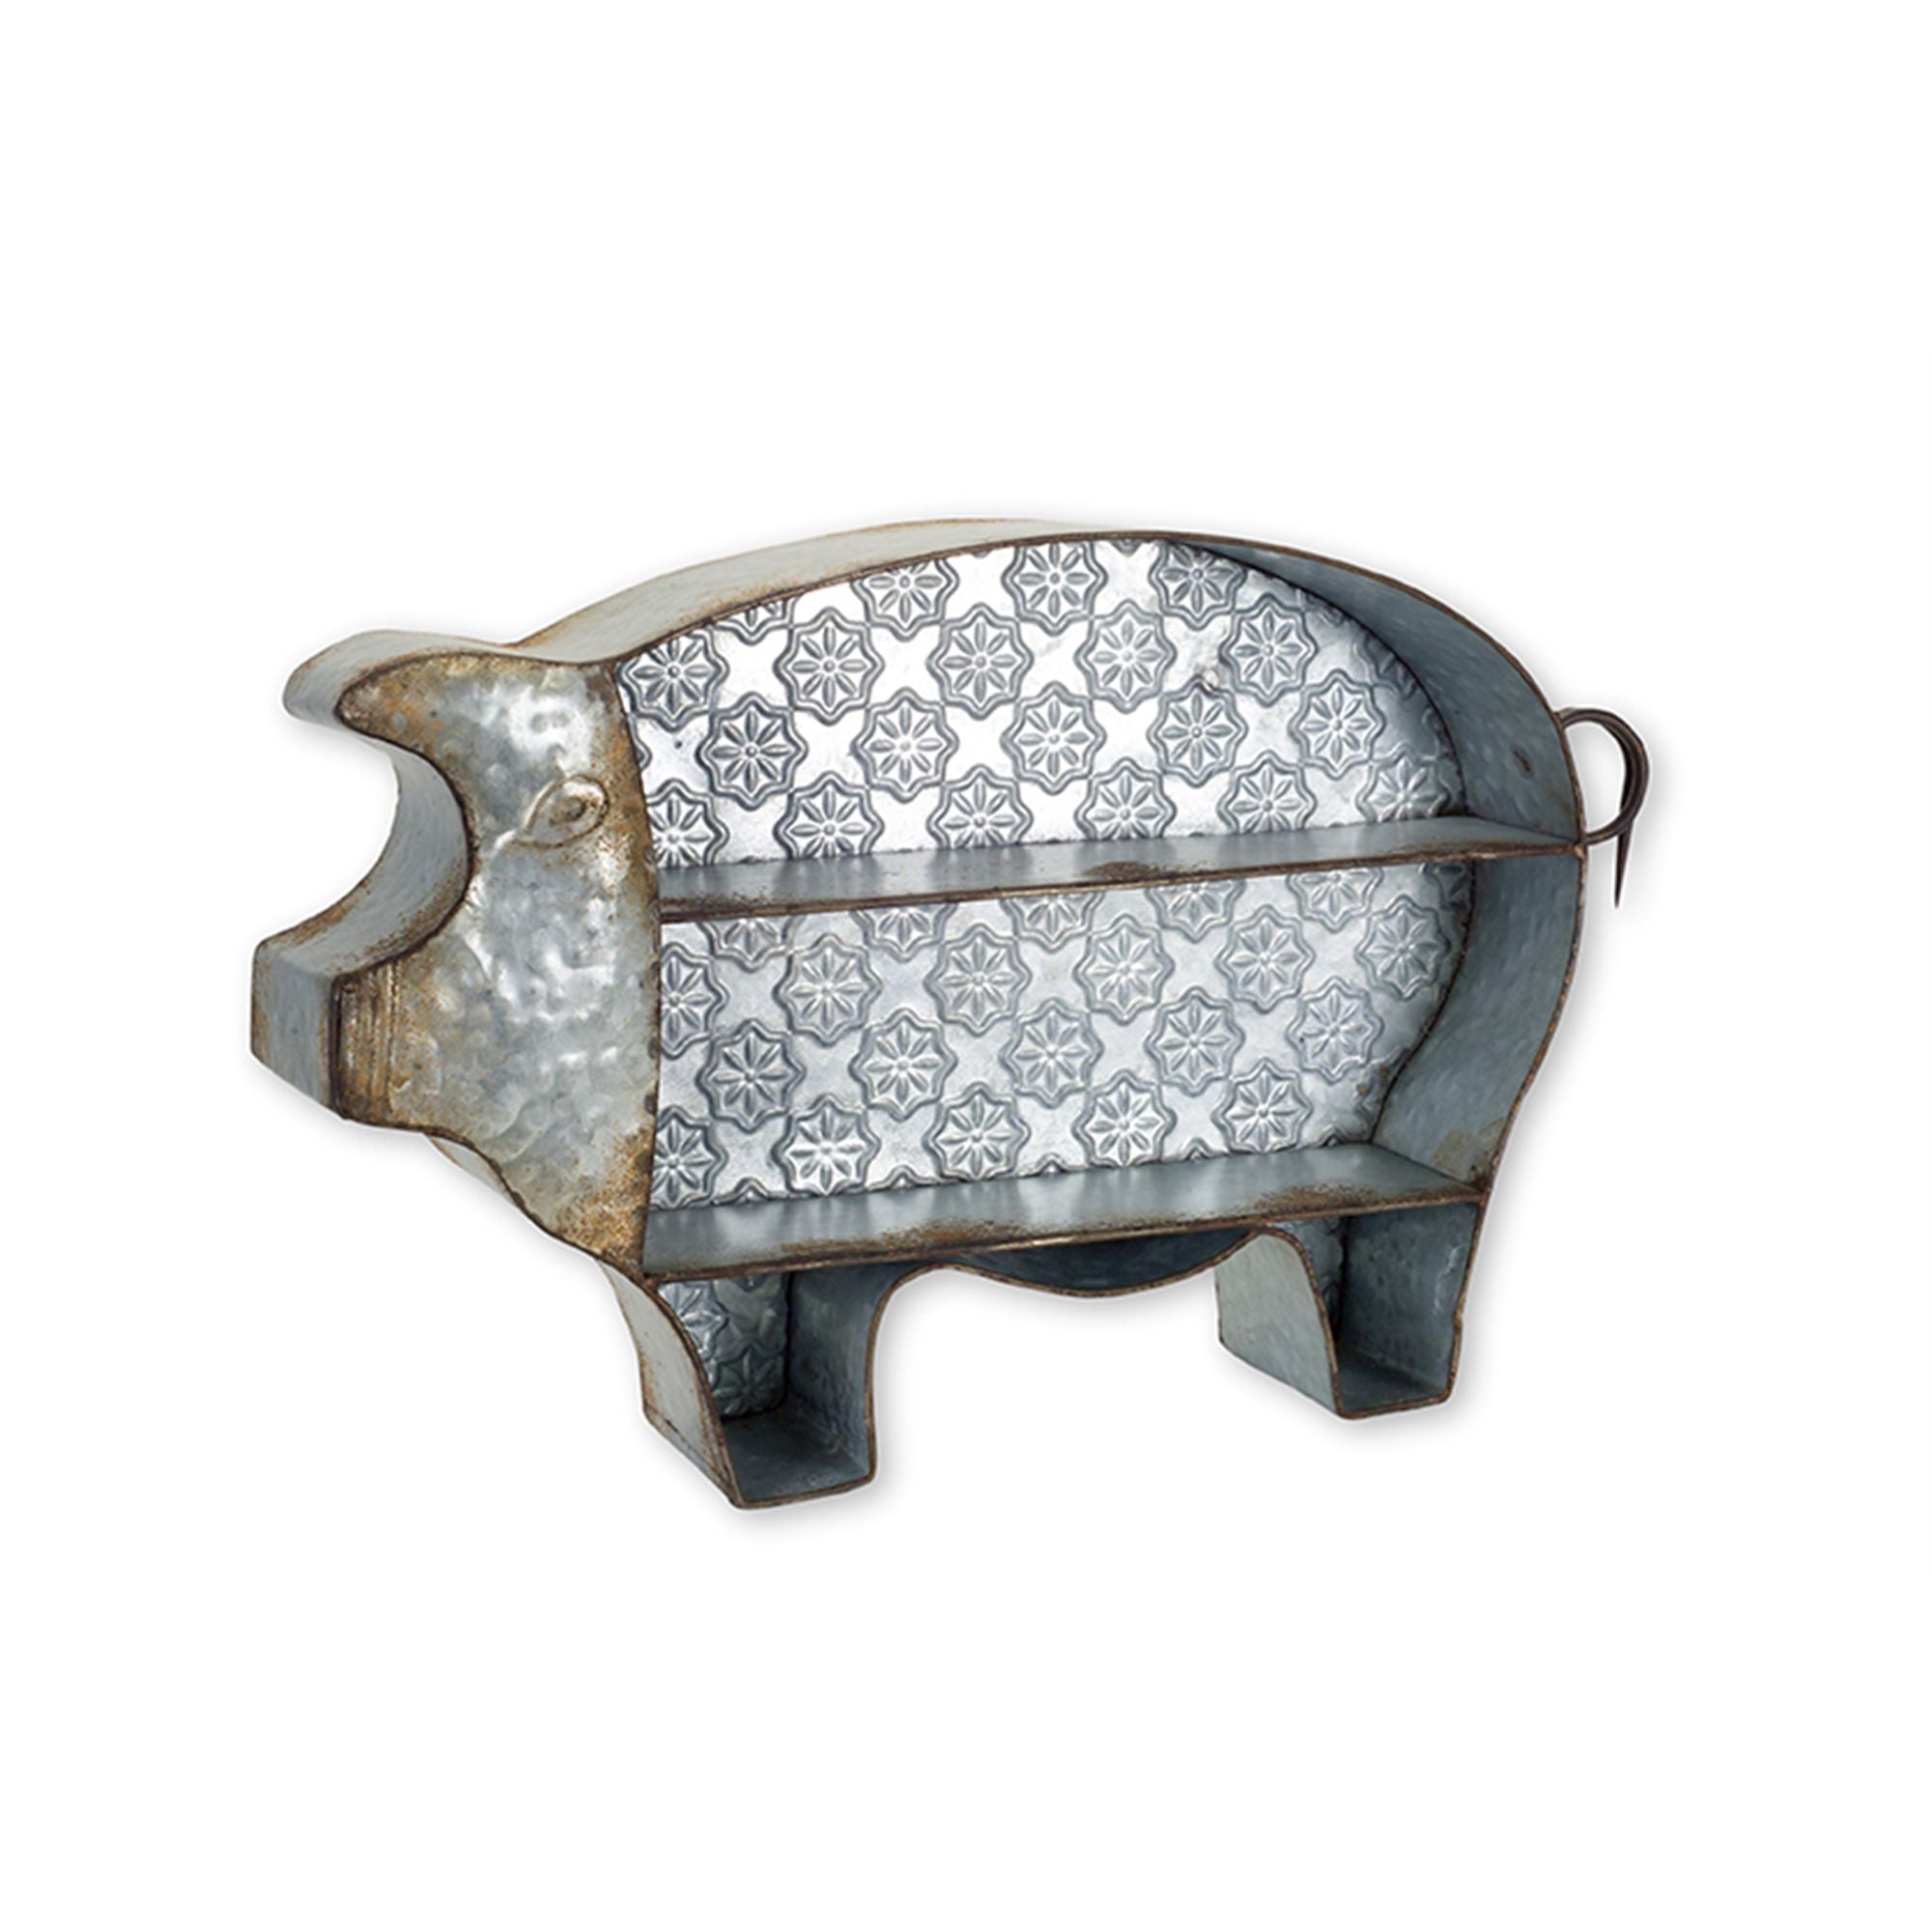 New PIG Tray with Distressed Finish 